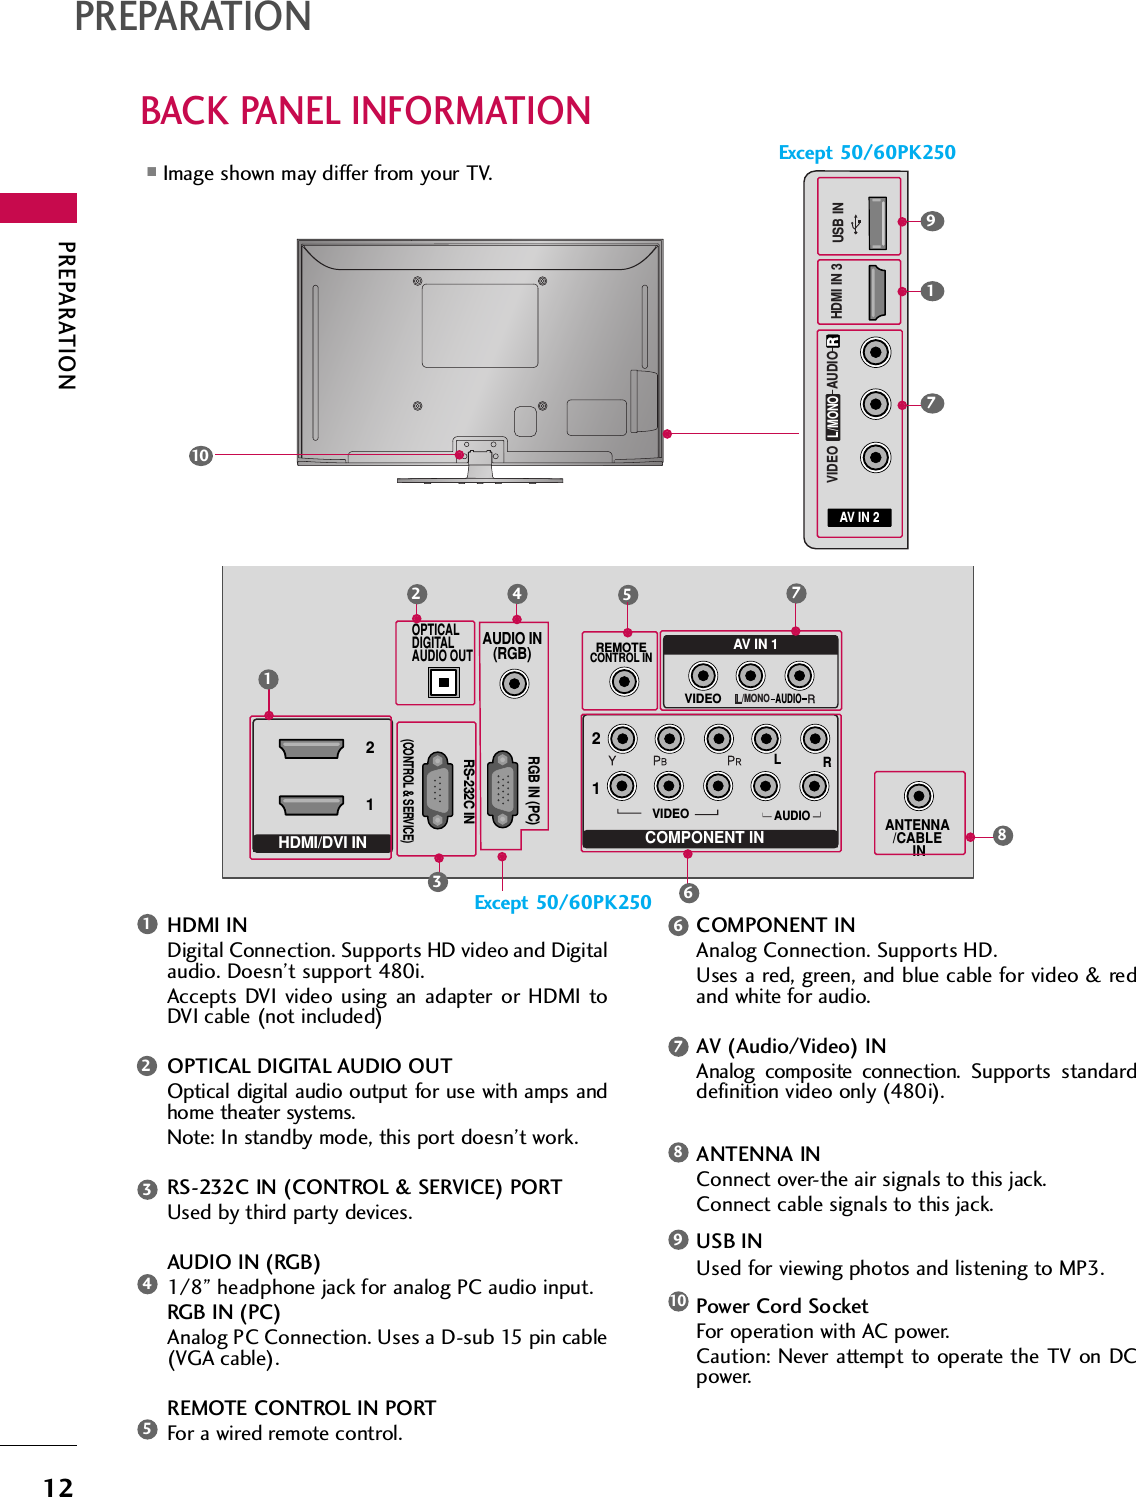 PREPARATION12PREPARATIONBACK PANEL INFORMATION■Image shown may differ from your TV.AV IN 2L/MONORAUDIOVIDEOUSB IN HDMI IN 3719RANTENNA/CABLE INHDMI/DVI IN 21RGB IN (PC)RS-232C IN(CONTROL &amp; SERVICE)OPTICALDIGITALAUDIO OUTAUDIO IN(RGB)COMPONENT IN12VIDEOAUDIOLRREMOTECONTROL INAV IN 1AUDIOVIDEO/MONO12HDMI INDigital Connection. Supports HD video and Digitalaudio. Doesn’t support 480i. Accepts DVI video using an adapter or HDMI toDVI cable (not included)OPTICAL DIGITAL AUDIO OUTOptical digital audio output for use with amps andhome theater systems. Note: In standby mode, this port doesn’t work.RS-232C IN (CONTROL &amp; SERVICE) PORTUsed by third party devices.AUDIO IN (RGB)1/8” headphone jack for analog PC audio input.RGB IN (PC)Analog PC Connection. Uses a D-sub 15 pin cable(VGA cable).REMOTE CONTROL IN PORTFor a wired remote control.COMPONENT INAnalog Connection. Supports HD. Uses a red, green, and blue cable for video &amp; redand white for audio.AV (Audio/Video) INAnalog composite connection. Supports standarddefinition video only (480i).ANTENNA INConnect over-the air signals to this jack.Connect cable signals to this jack.USB INUsed for viewing photos and listening to MP3.Power Cord SocketFor operation with AC power. Caution: Never attempt to operate the TV on DCpower.1234591086734578RRVARIABLE AUDIO OUT(            )10Except 50/60PK250Except 50/60PK2506